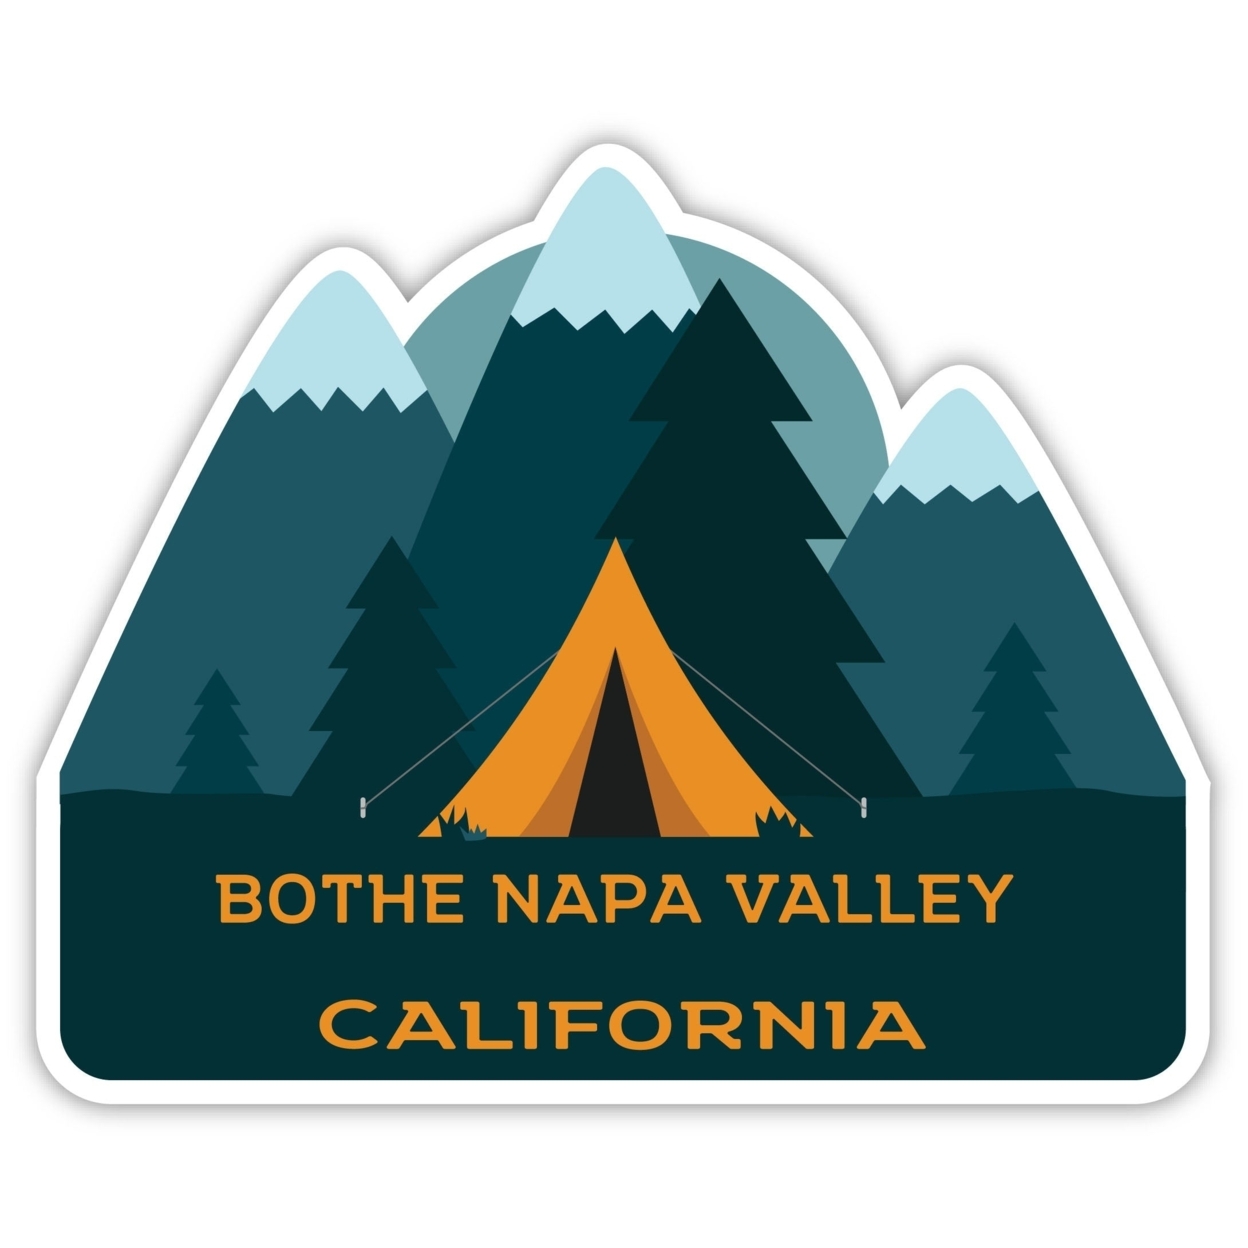 Bothe Napa Valley California Souvenir Decorative Stickers (Choose Theme And Size) - 4-Pack, 6-Inch, Tent